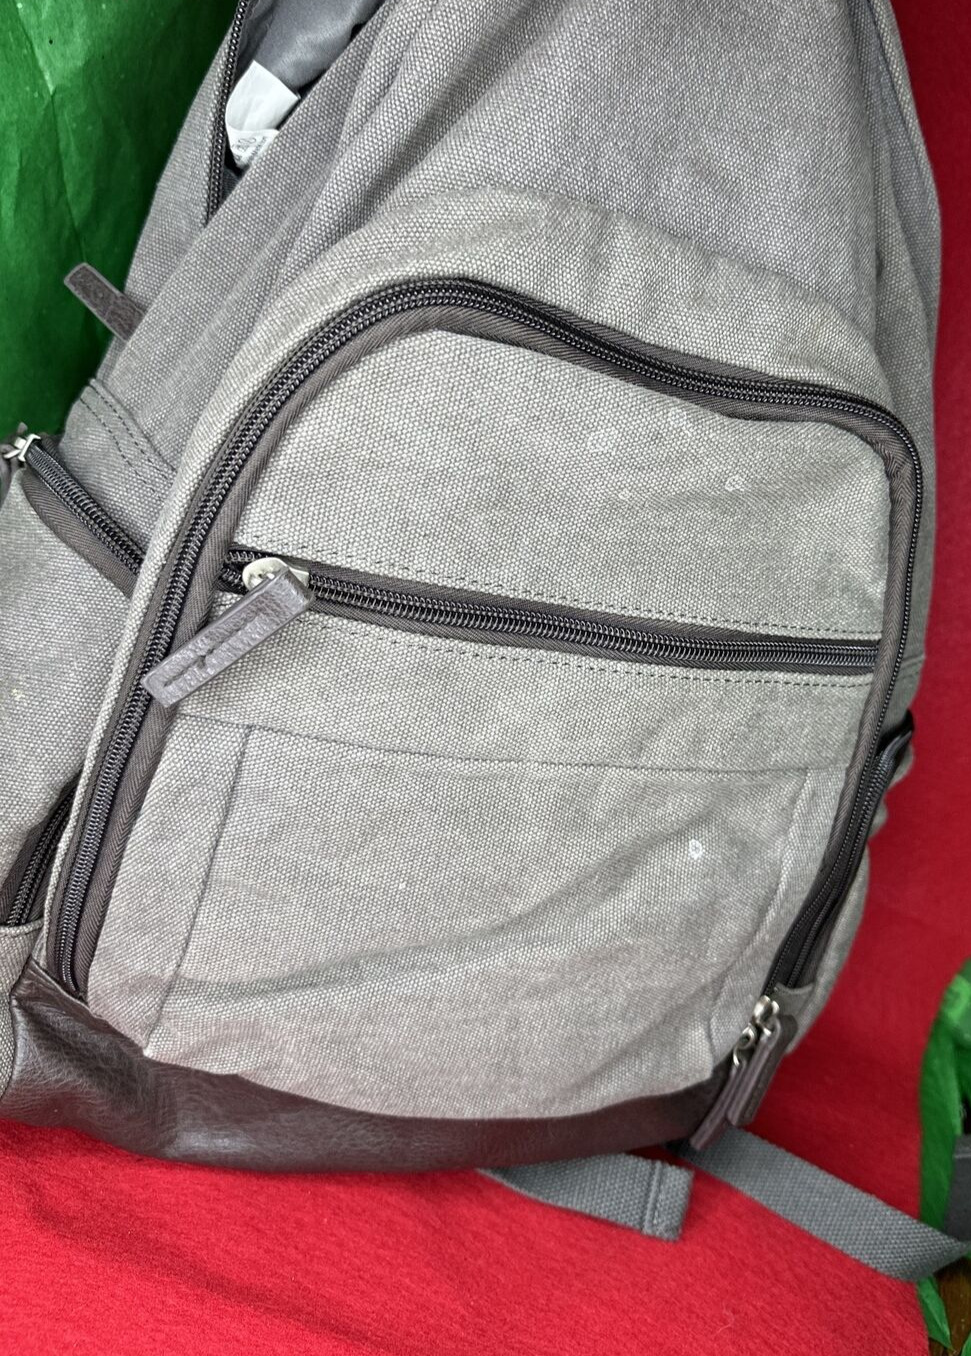 Occasionally Made - Lrg Laptop Padded Backpack Canvas Dark Gray Adjust Straps